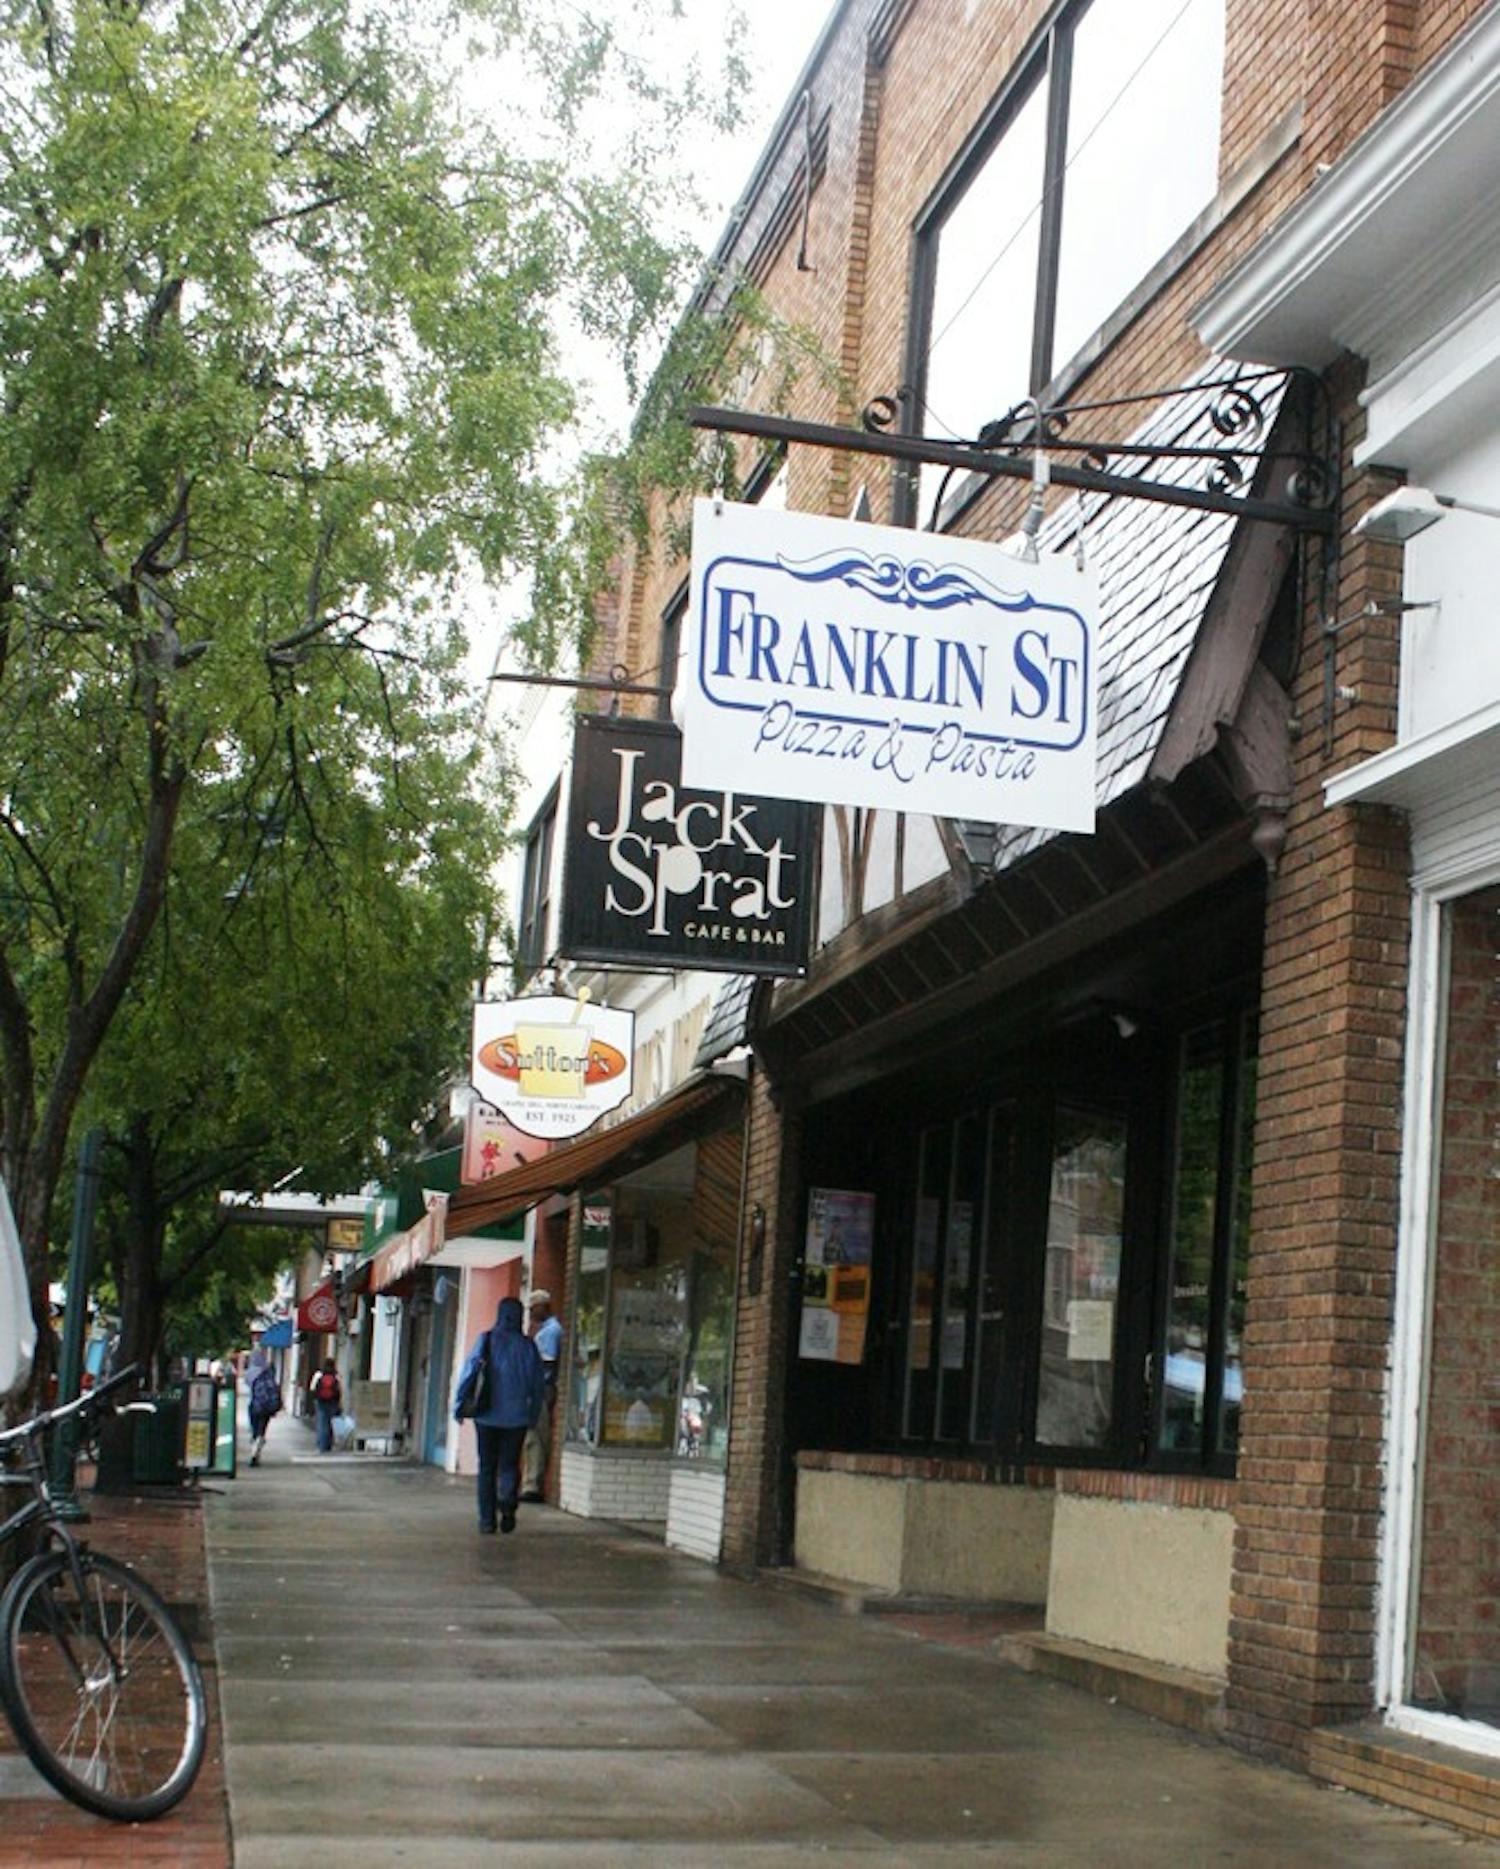 Franklin Street businesses, despite the economic downturn and high rent costs, are still maintaining growth and bringing in customers.